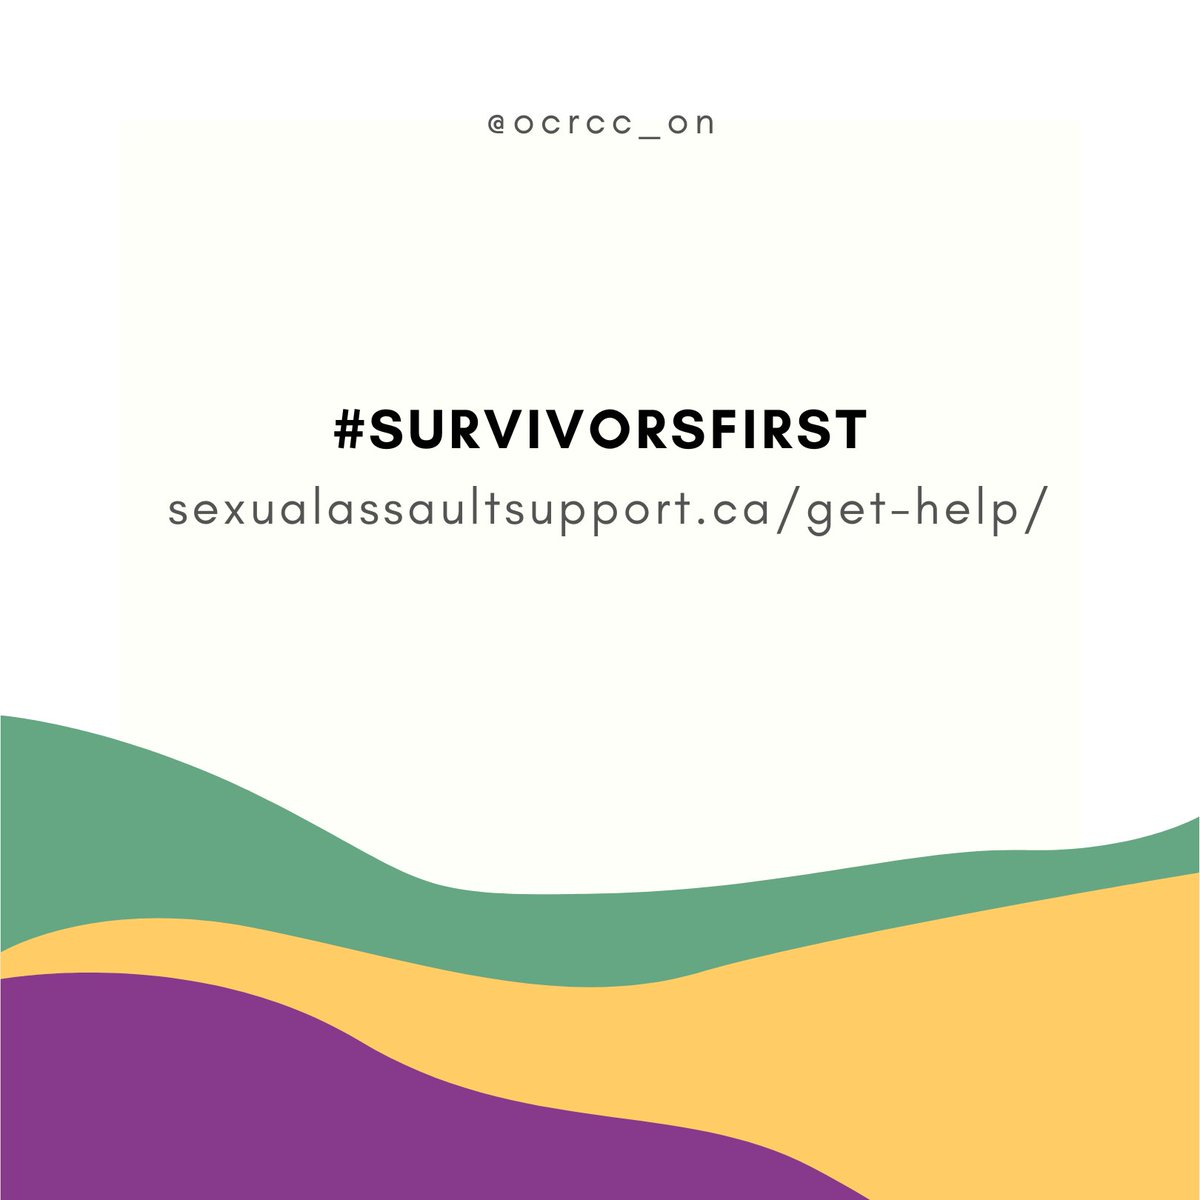 In response to news about the Weinstein case, the OCRCC reaches out to those affected by sexual violence. These cases are not often resolved through the justice system.

If something has happened to you, there are people who believe & support you. 

#SurvivorsFirst #SVPM24 #MeToo